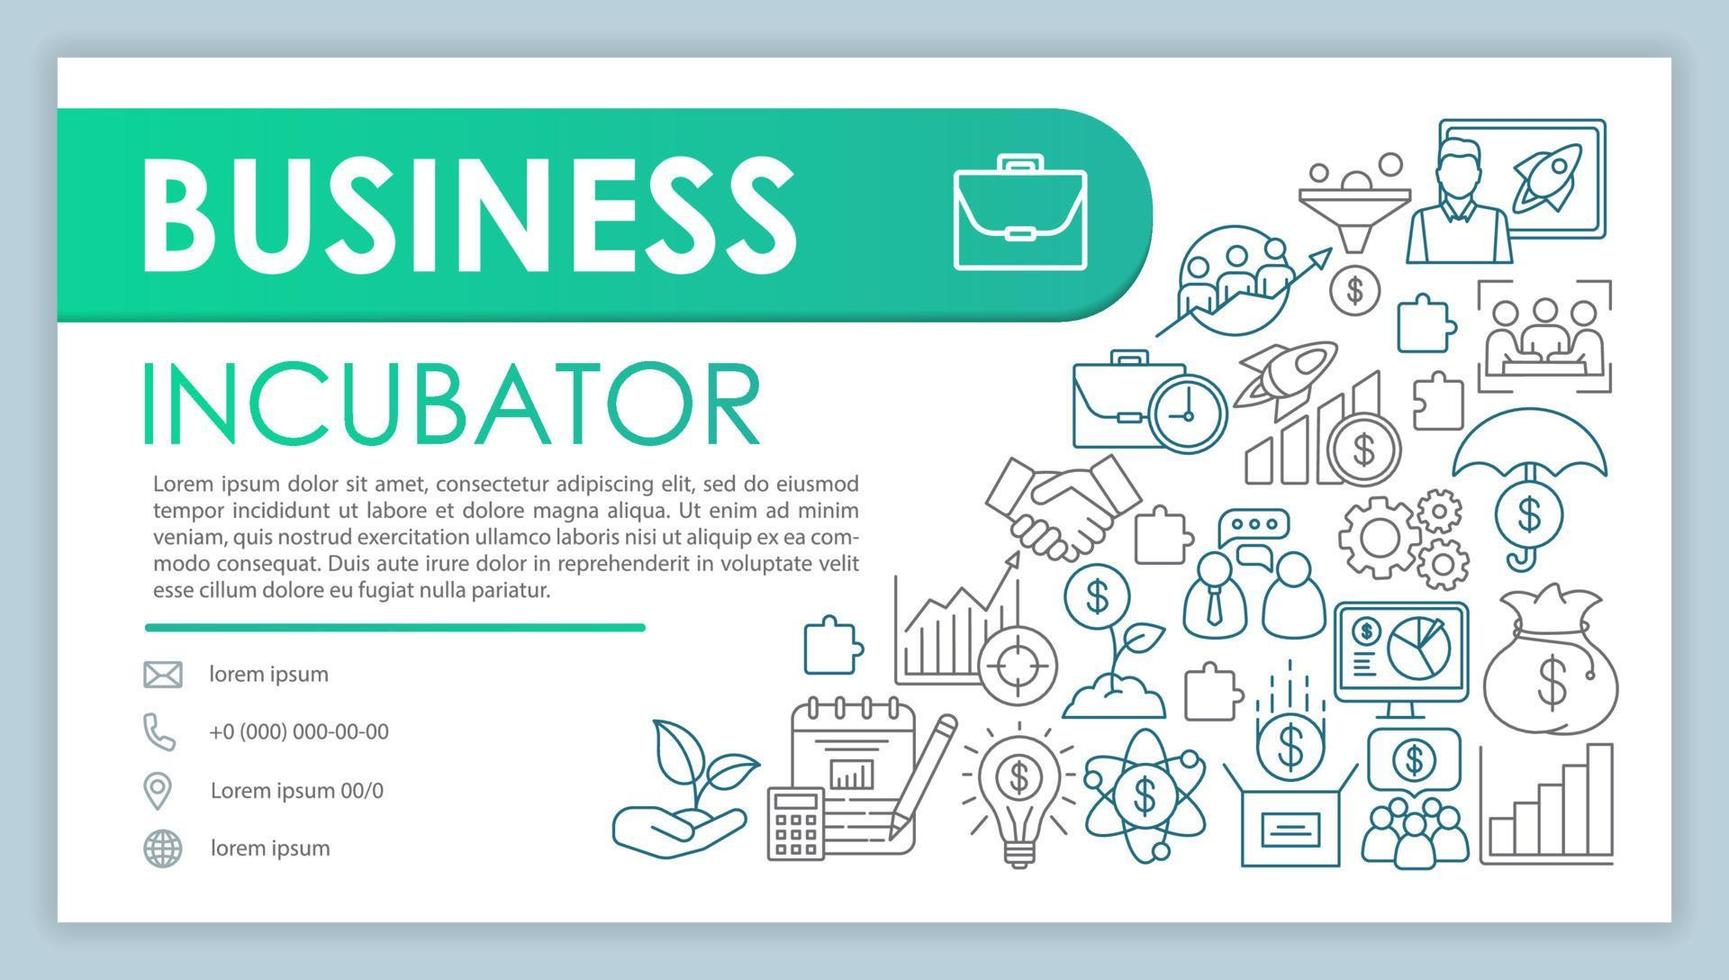 Business incubator banner, business card vector template. Project management. Company contact with phone, email line icons. Startup launch service. Presentation, web page idea. Corporate print layout